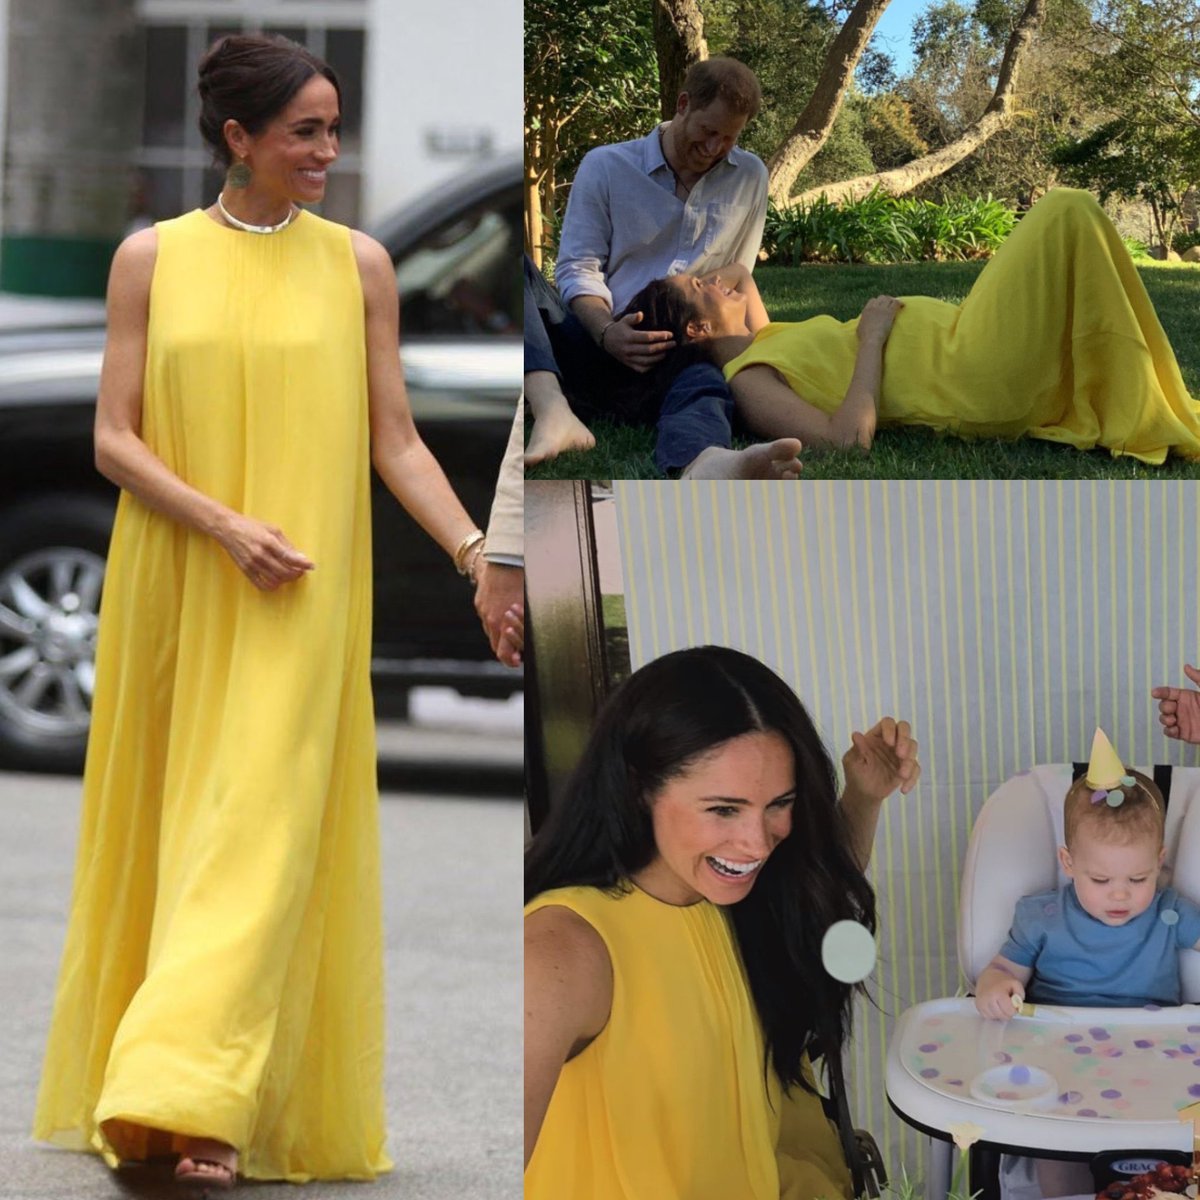 Imagine spending months on Ozempic only to wear a maternity dress used to hide your moonbump 🤣🤣🤣🤣🤣

#MeghanMarkleEXPOSED #MeghanMarkleIsAConArtist #MeghanMoonbump